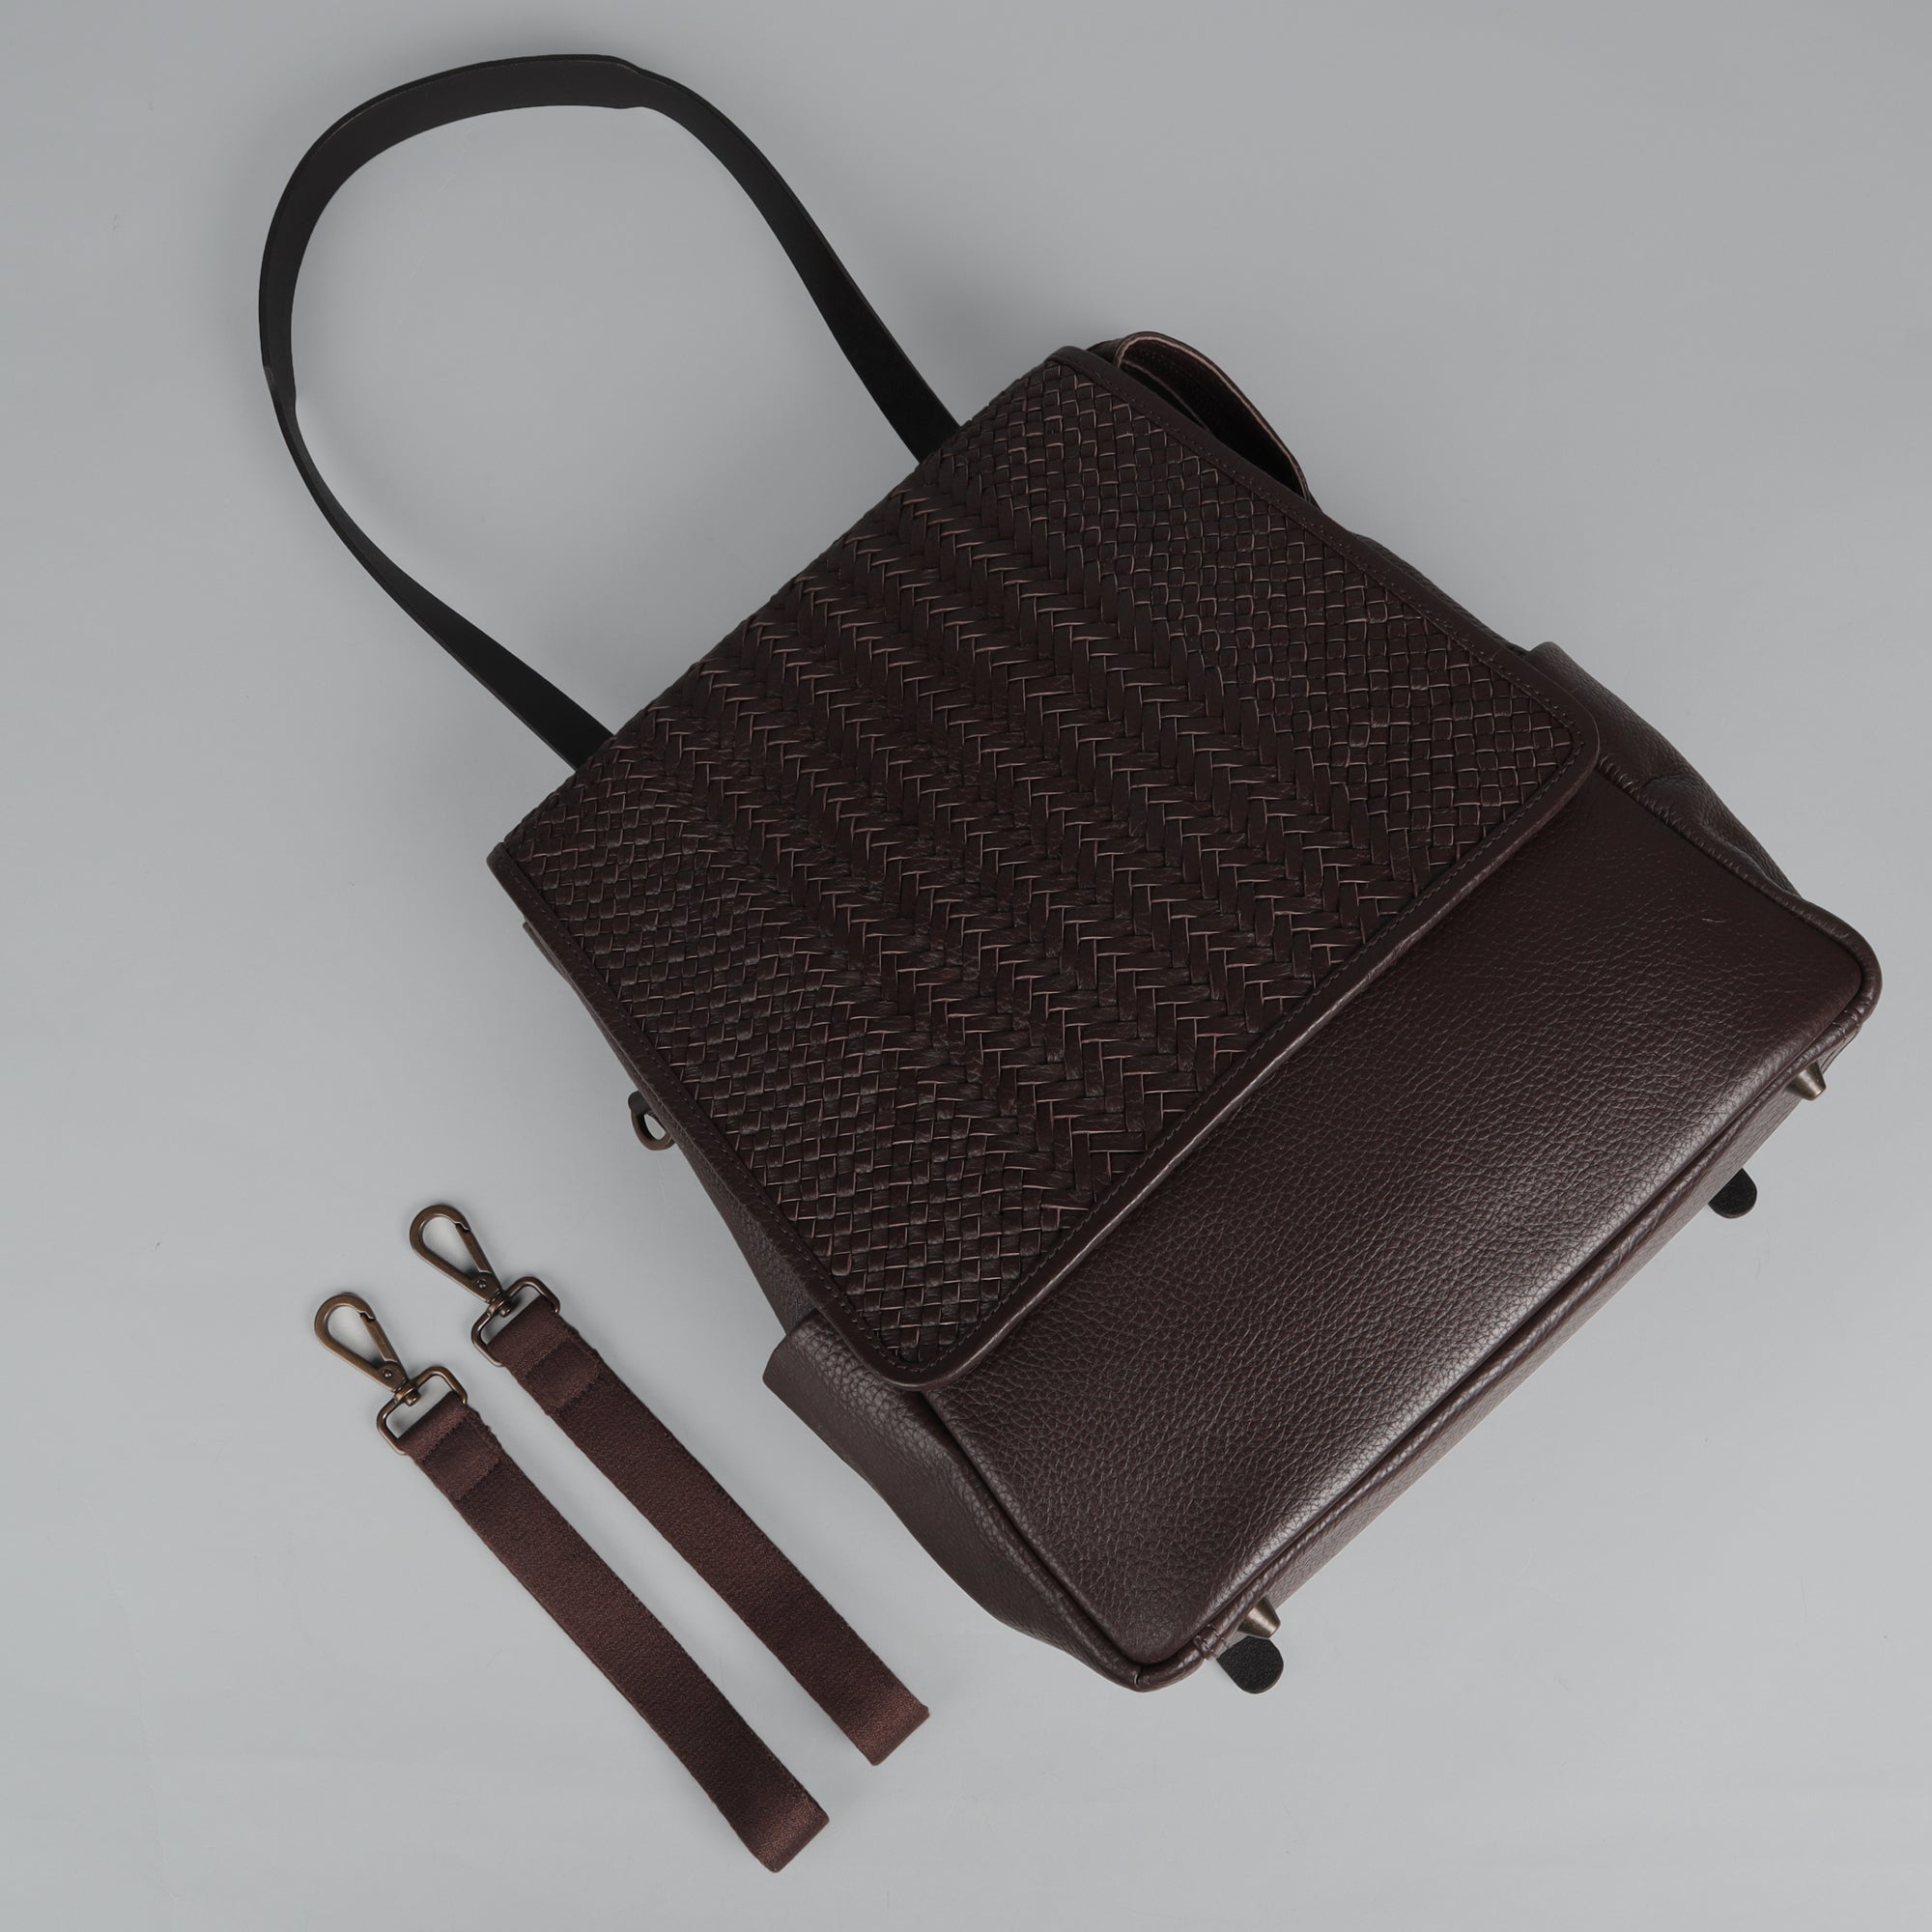 Donna Weaved Leather Diaper Bag